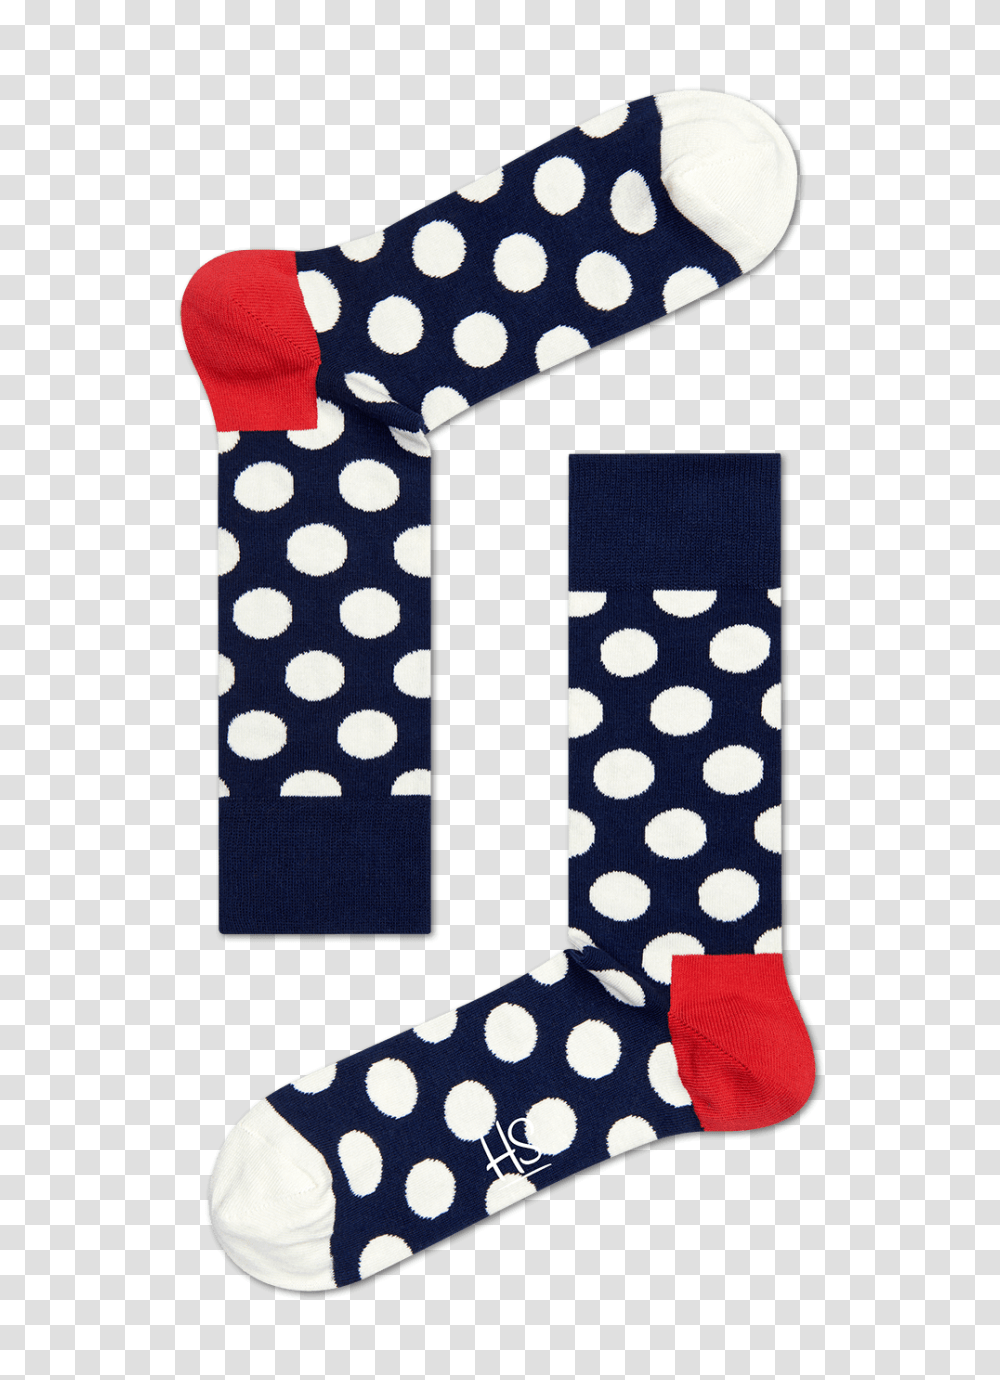 Bold And Colorful Polka Dot Socks Big Dots Underwear Hs Sweden, Texture, Stocking, Christmas Stocking, Gift Transparent Png